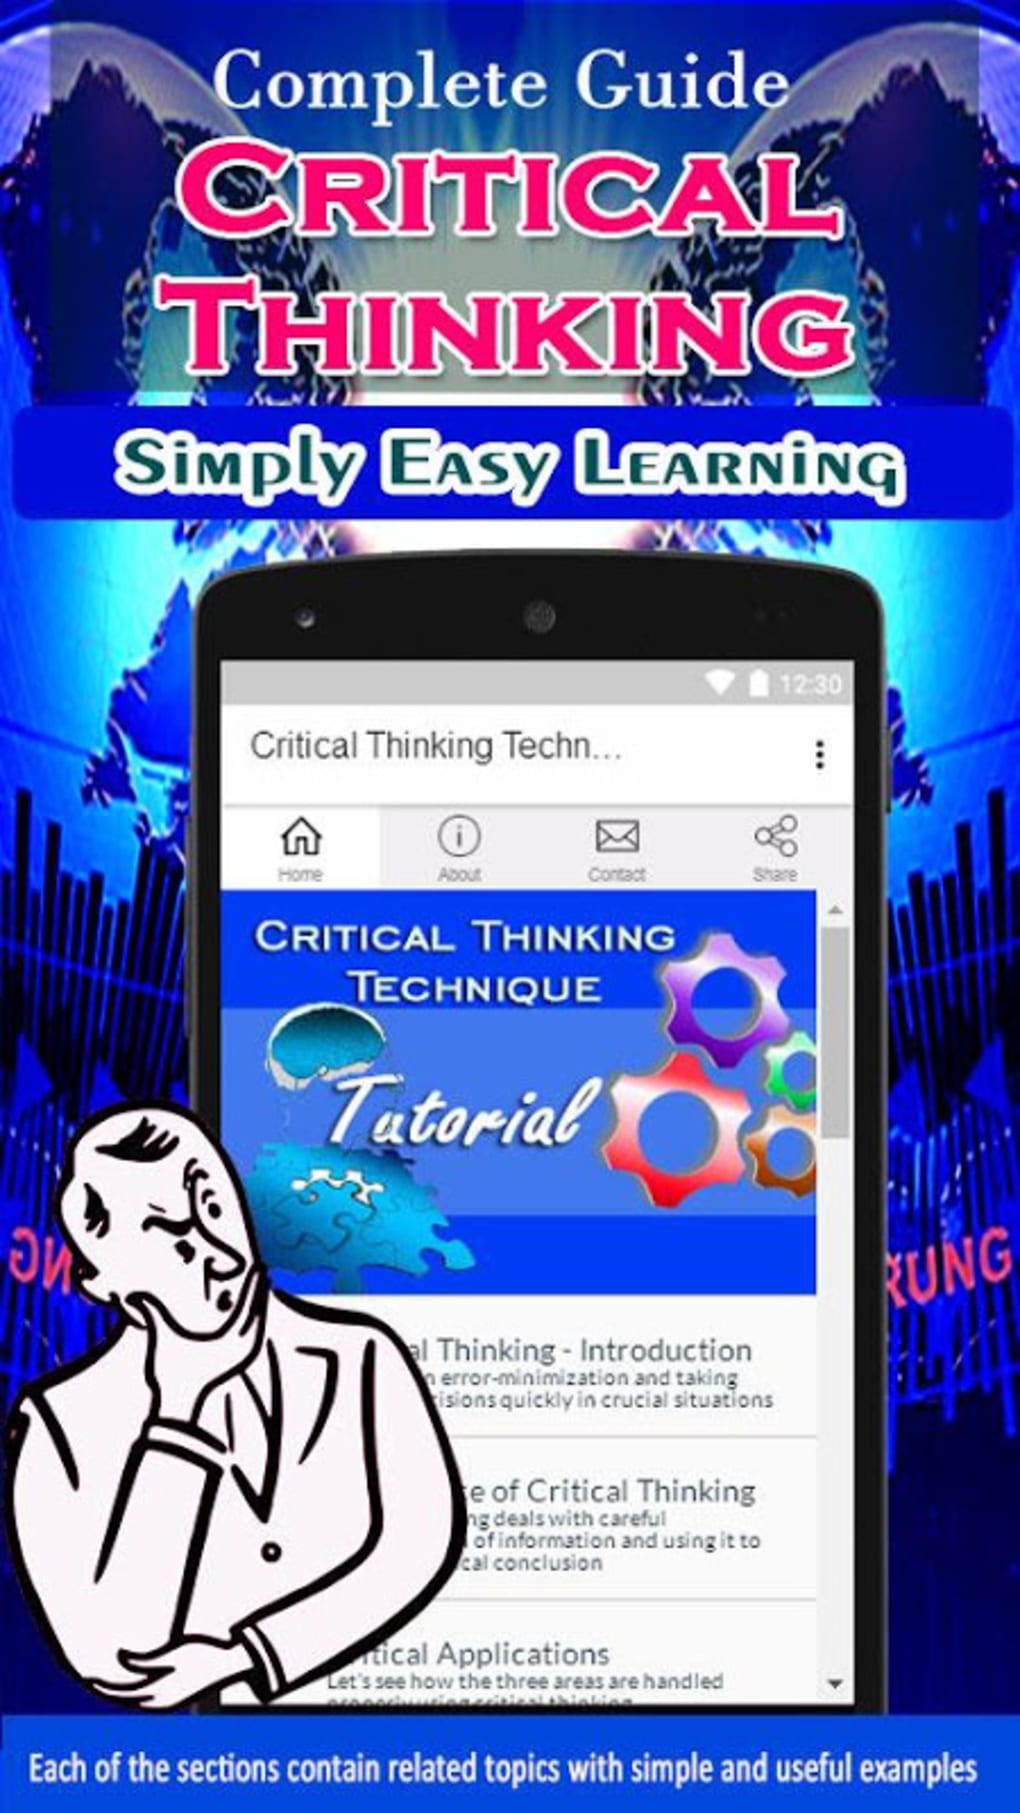 app for critical thinking